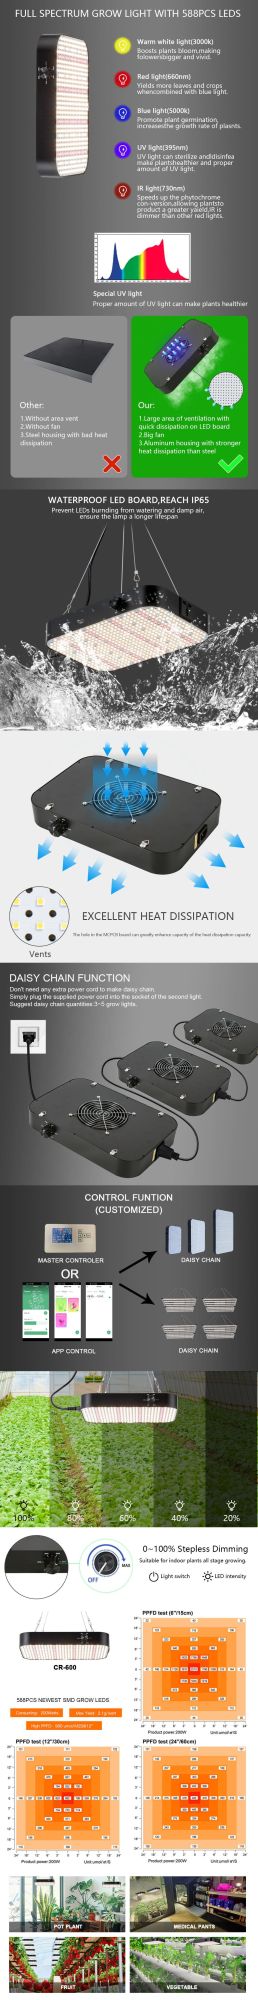 Indoor Greenhouse Grow Tent 130W Seedling, Vegetables, Flower, Full Spectrum Hanging LED Plant Lamp with Daisy Chain Function